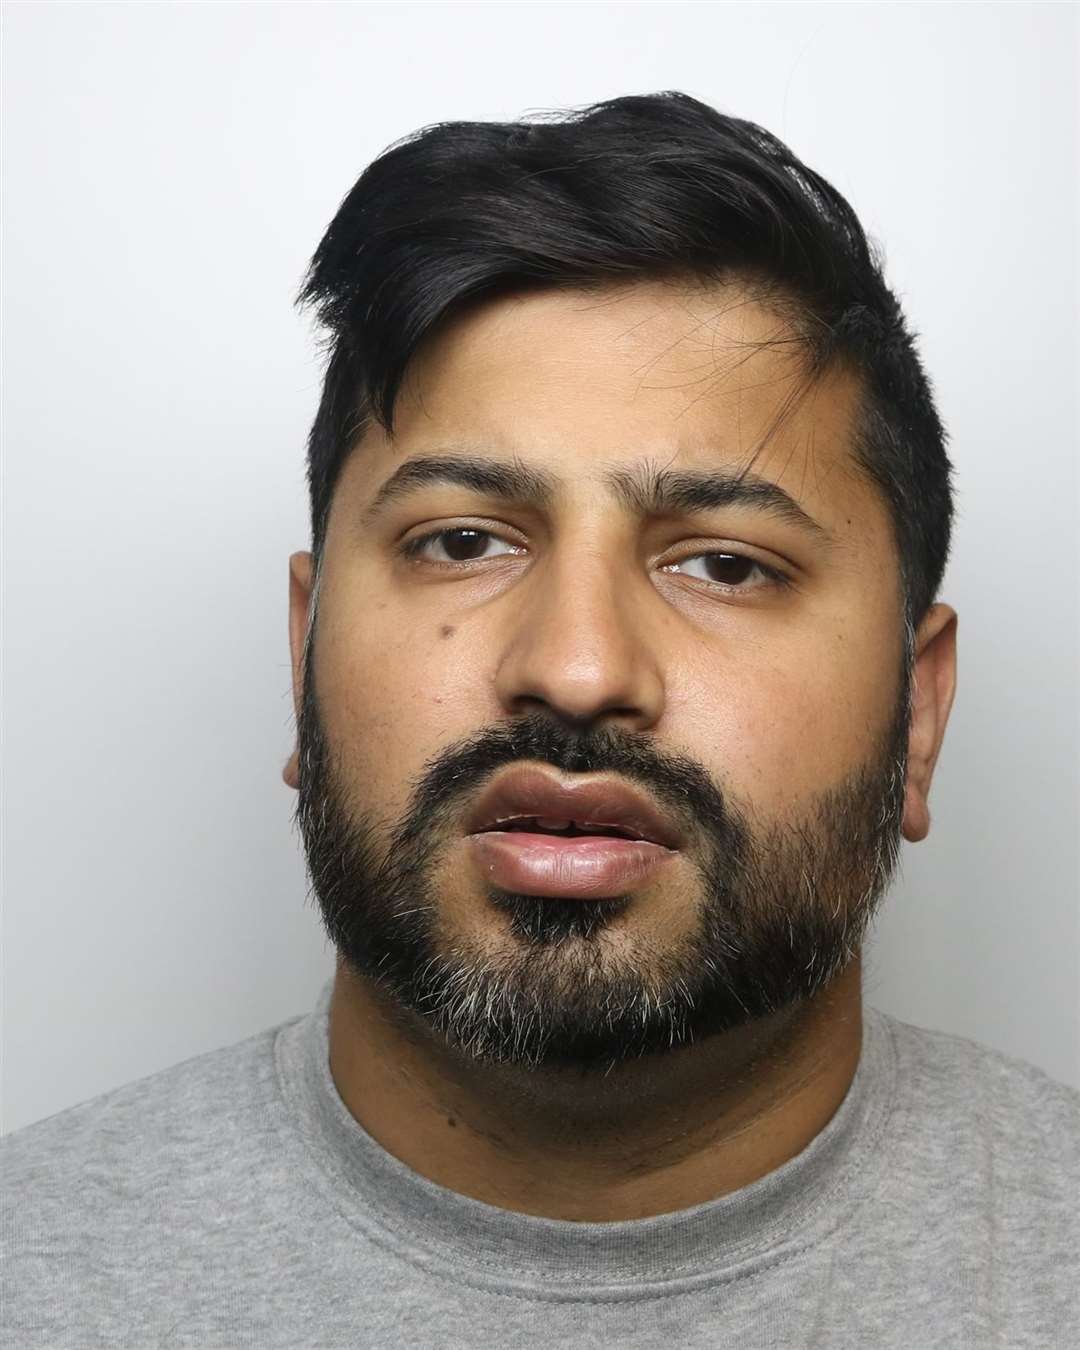 Mohammed Ikram has been jailed for two-and-a-half years (HMRC/PA)